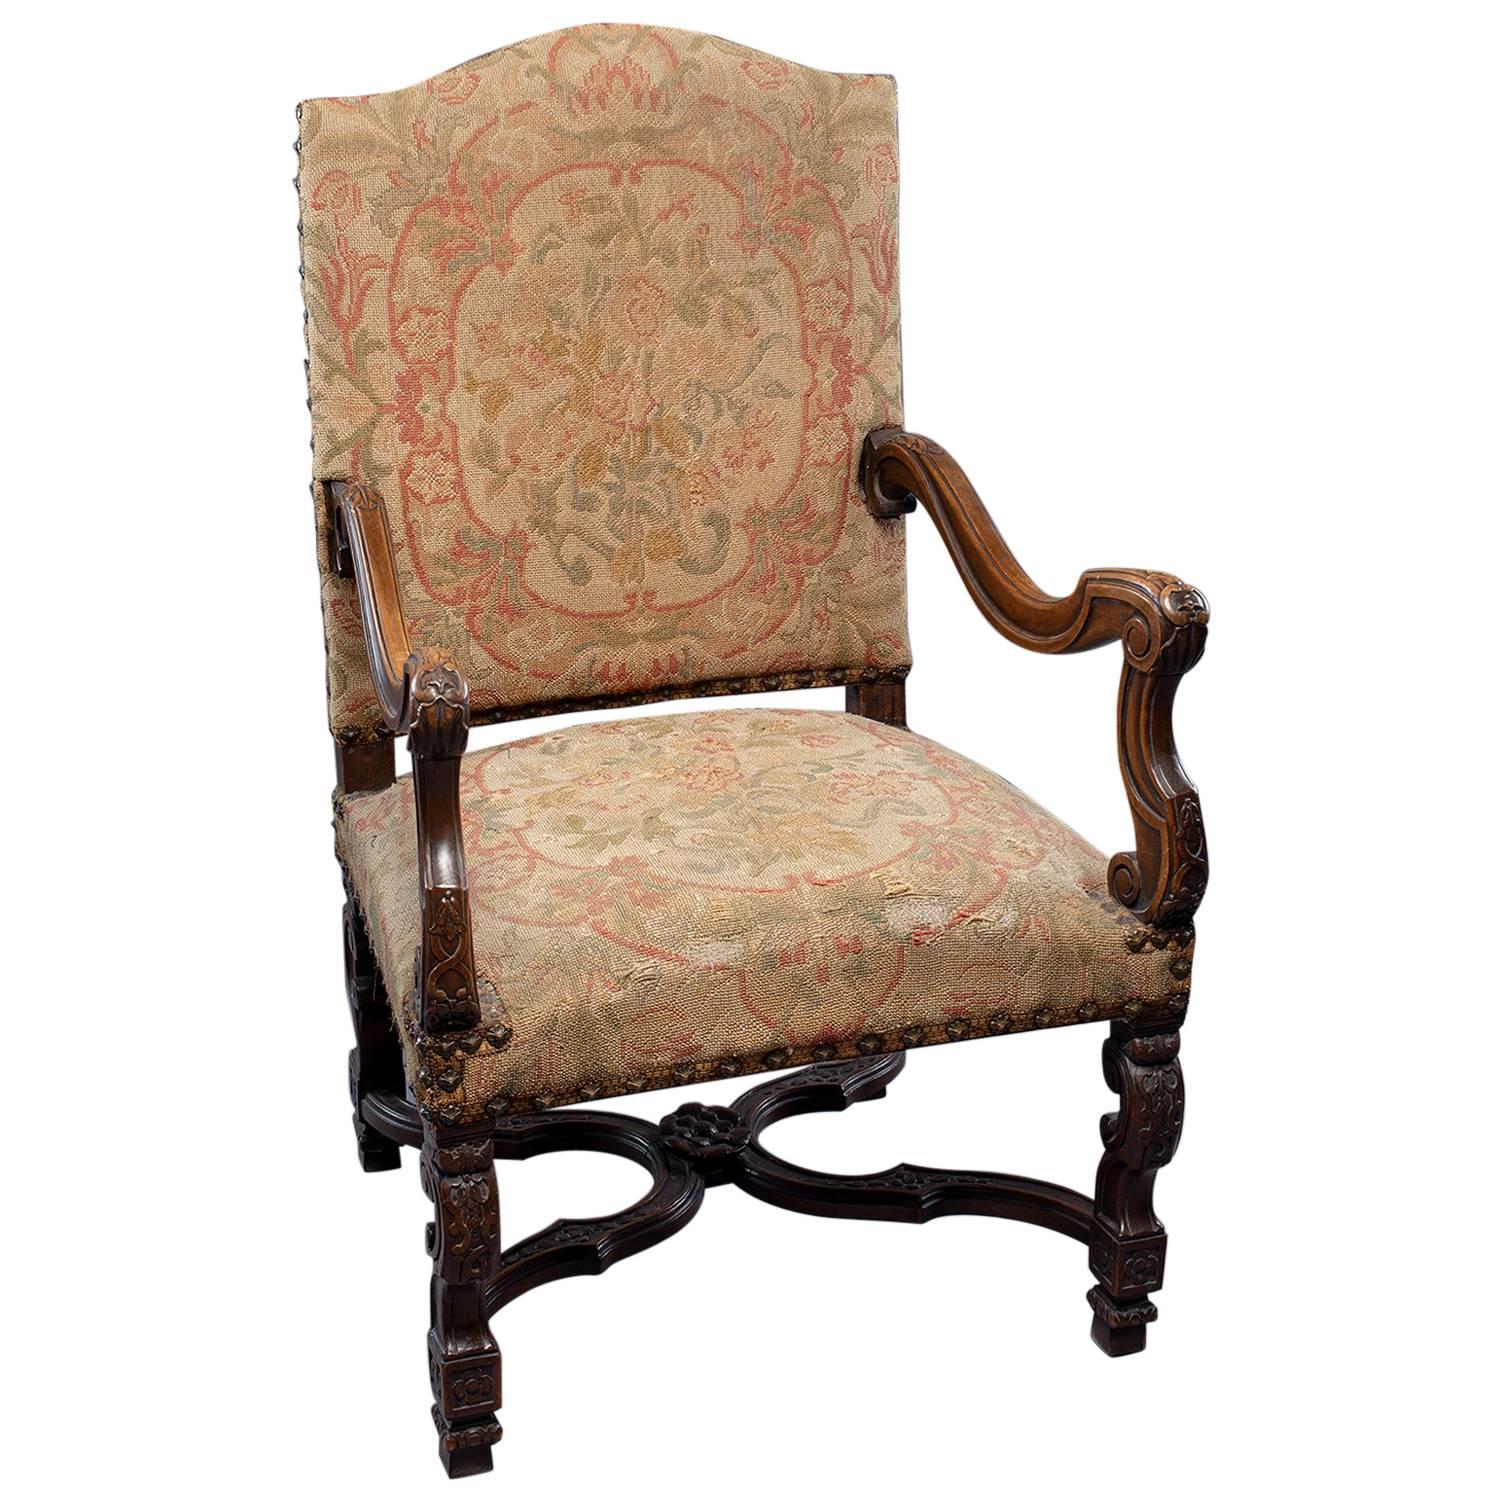 19th Century Armchair with Original Tapestry Upholstery